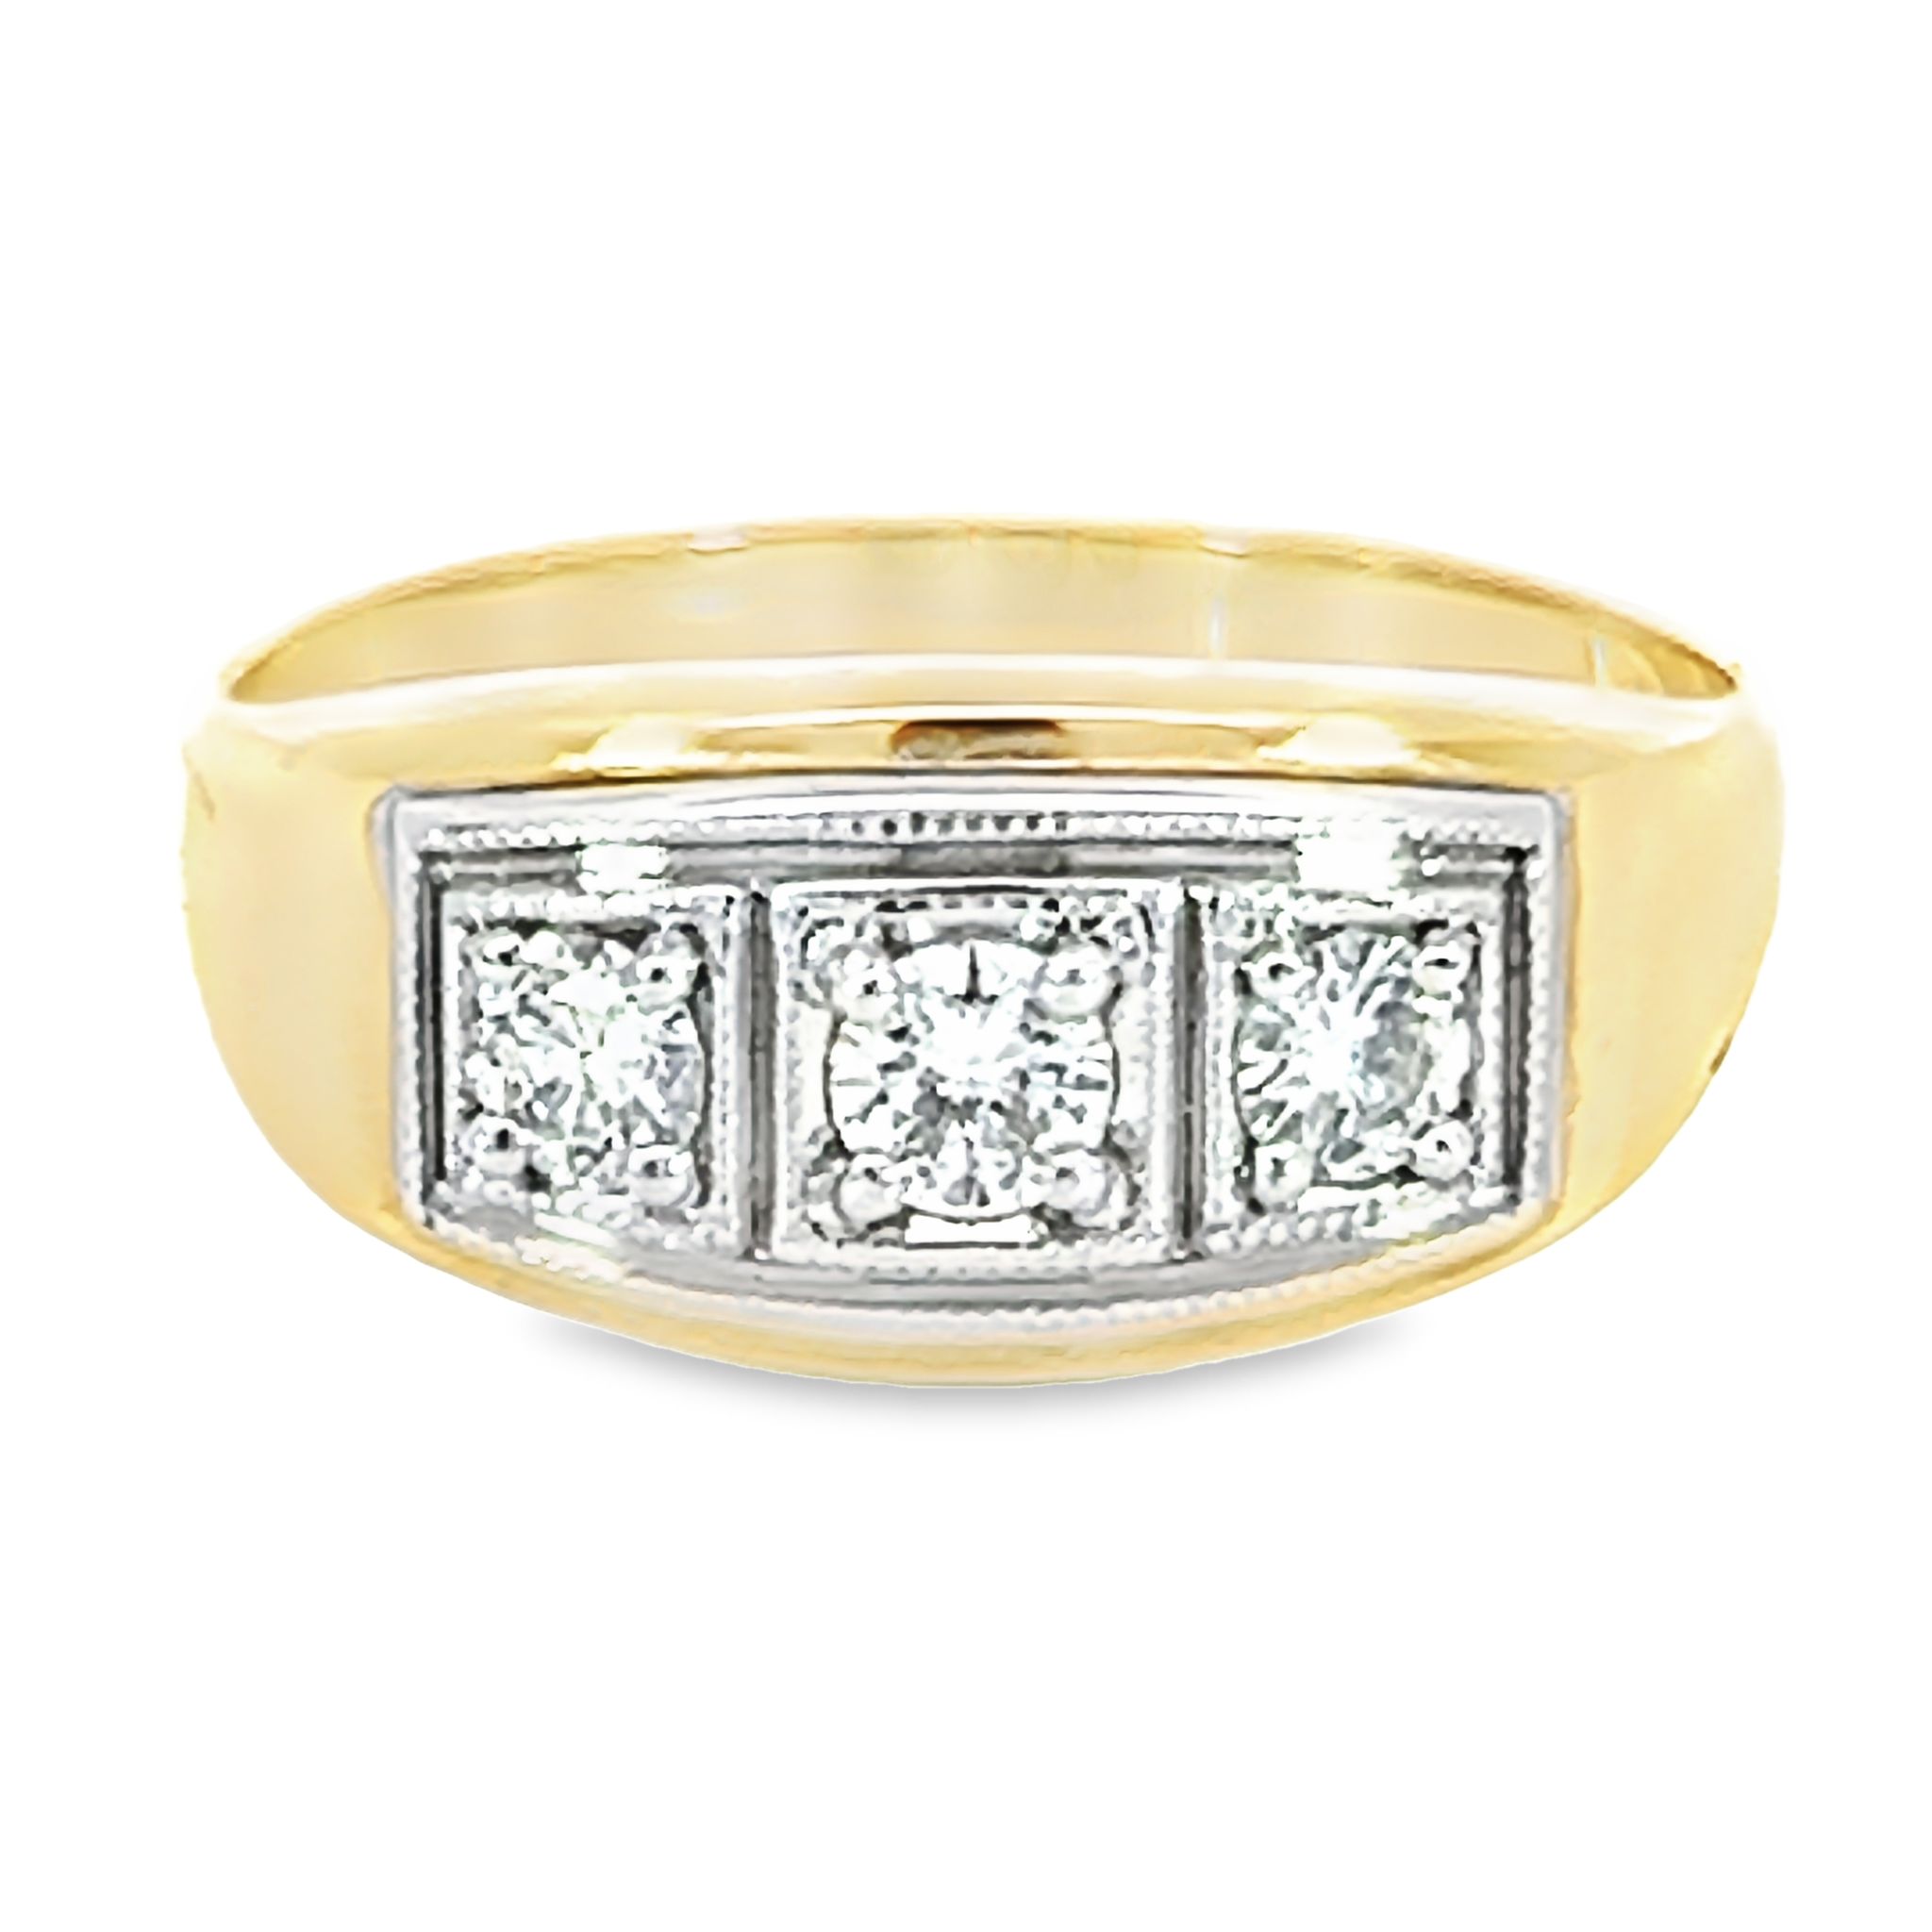 14Karat yellow gold gents with with 3=.65 TW G VS diamonds set in white gold top.